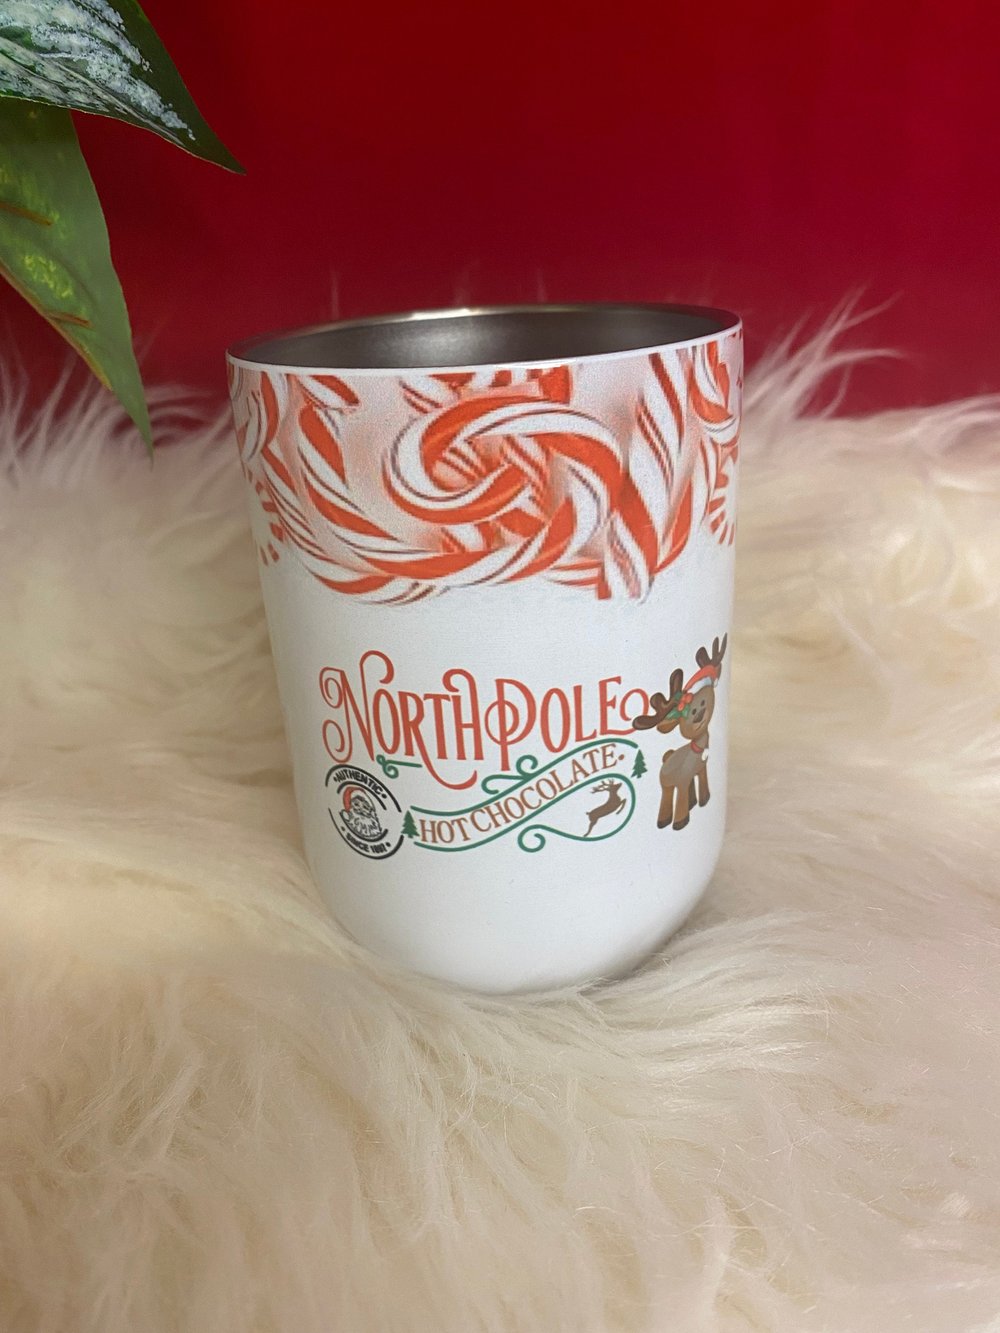 Personalized Children's Hot Chocolate Mugs – A Gift Personalized